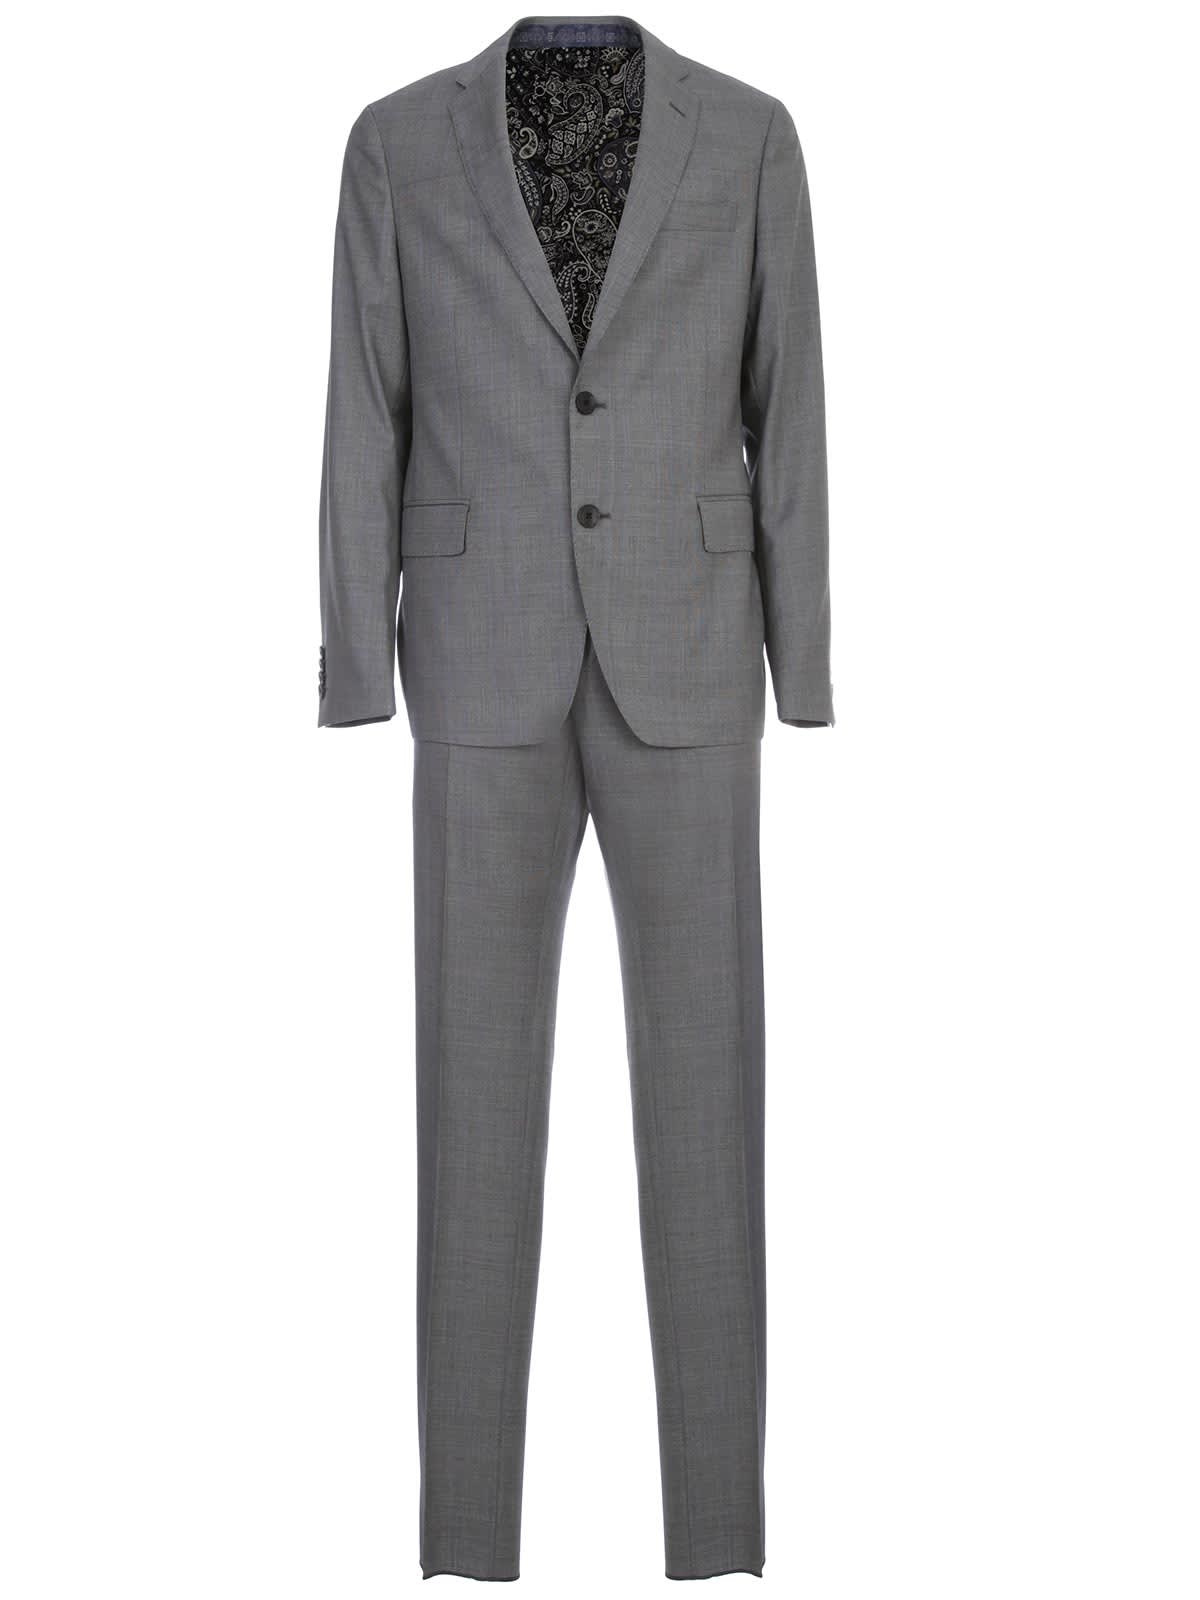 ETRO TRADITIONAL SLIM SUIT,1A940.1163 3 GREY